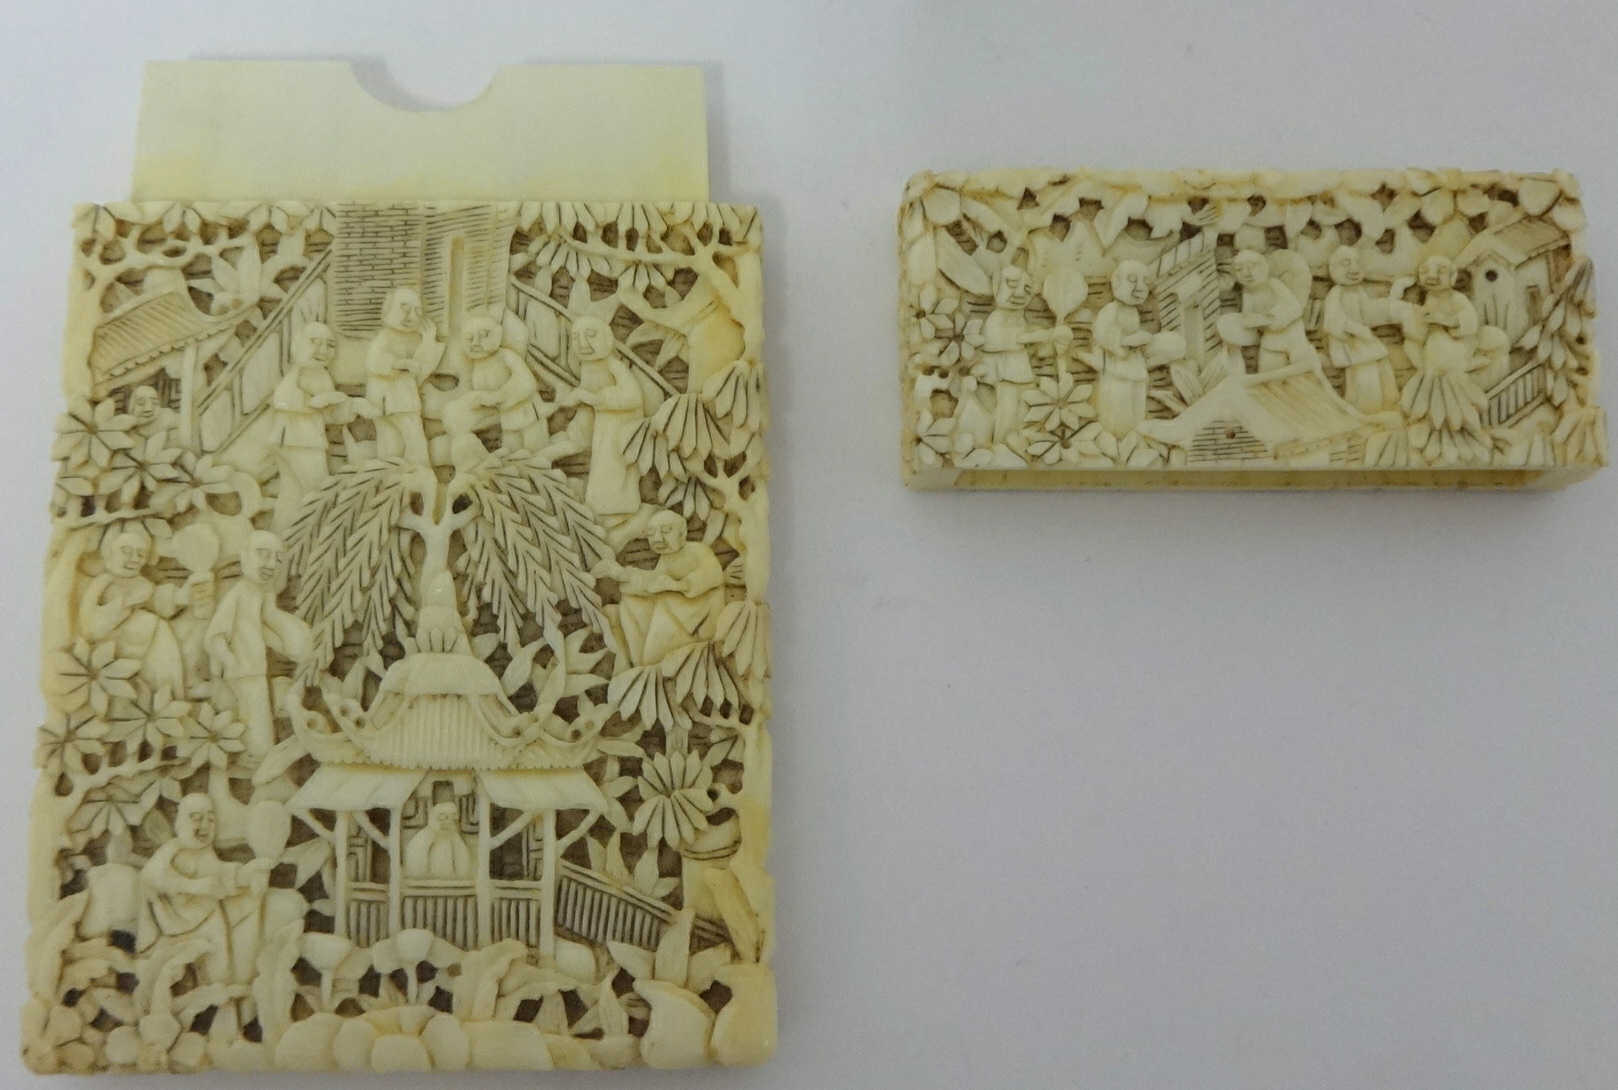 Antique Chinese carved ivory card case, finely carved with figures and trees etc, 10cm high - Image 2 of 2